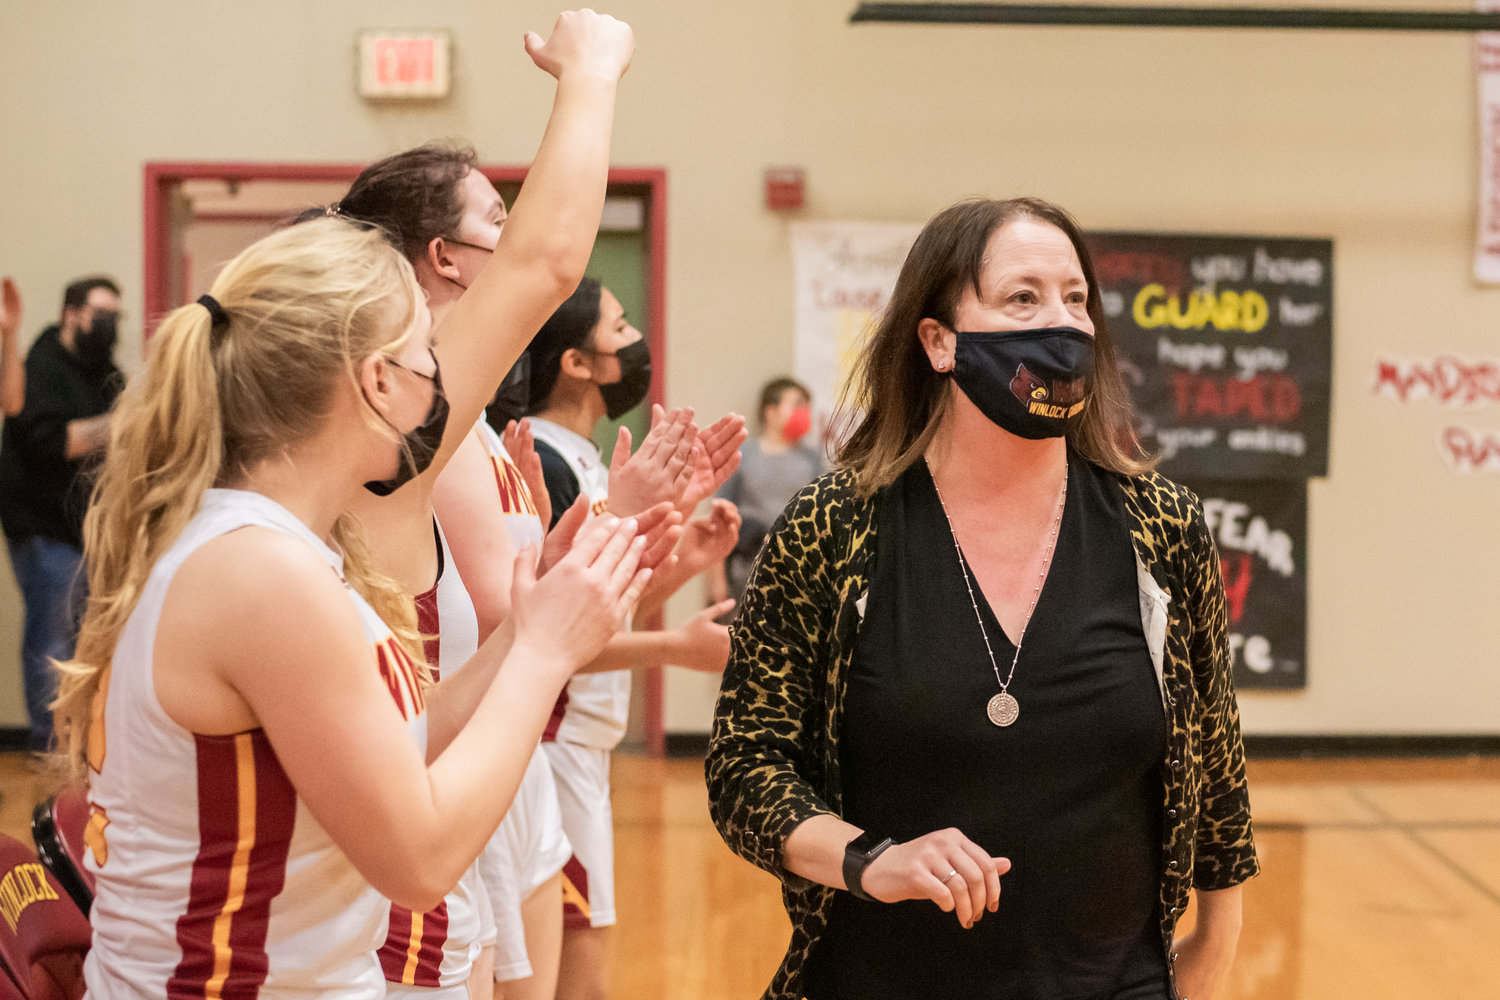 Winlock Head Coach Dracy McCoy looks on as athletes celebrate during a game against Rainier Wednesday night.